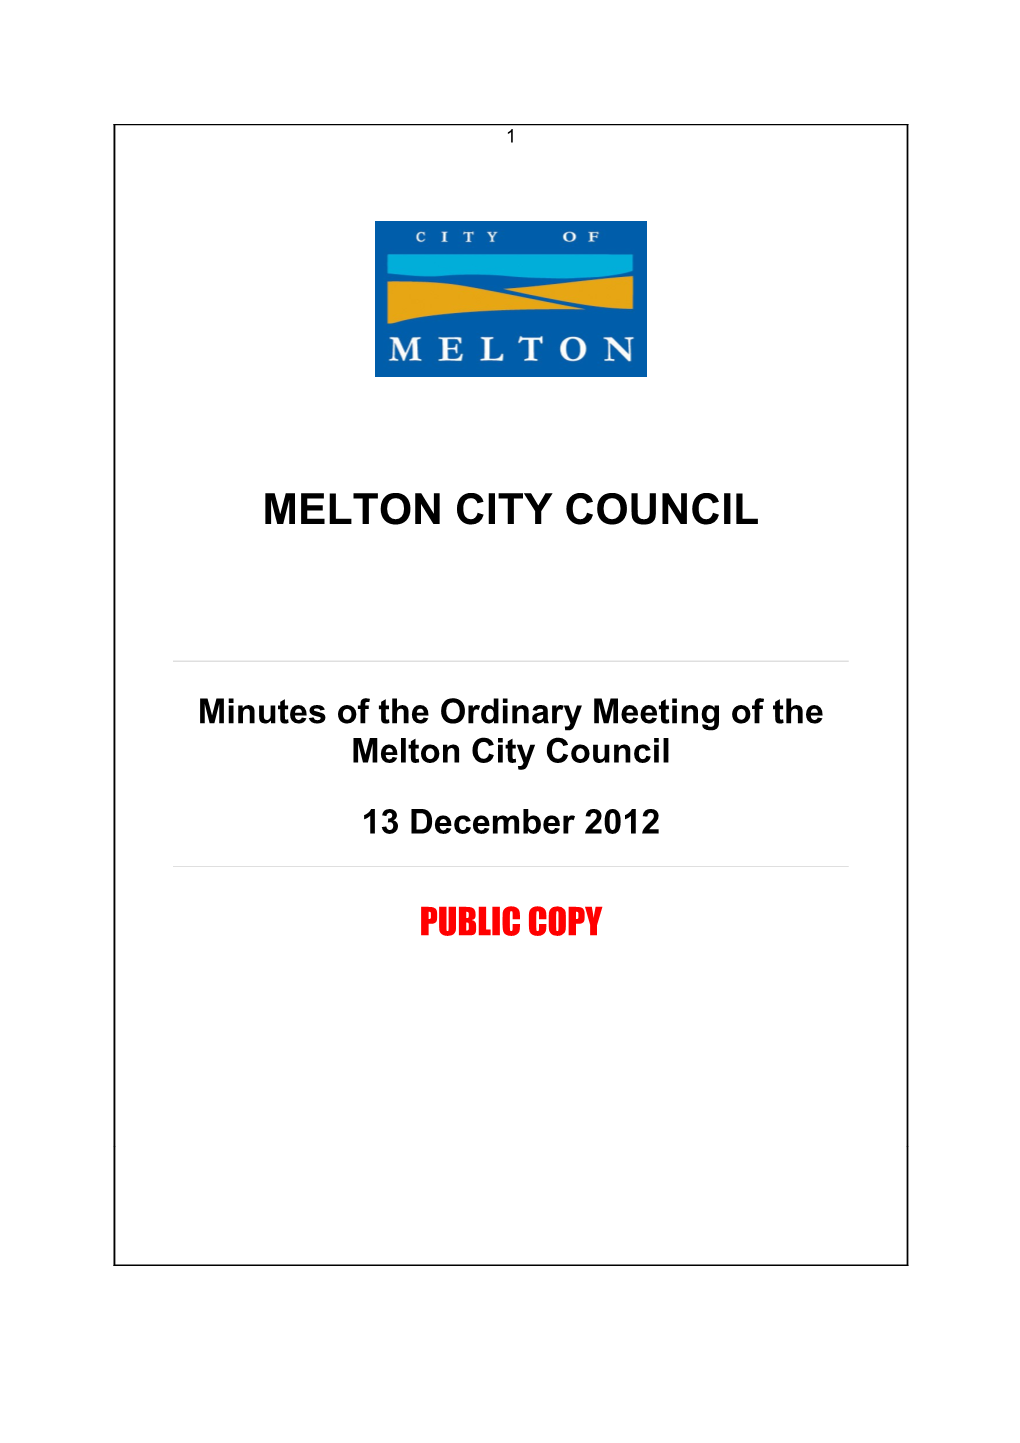 Minutes of Ordinary Meeting of Council - 13 December 2012